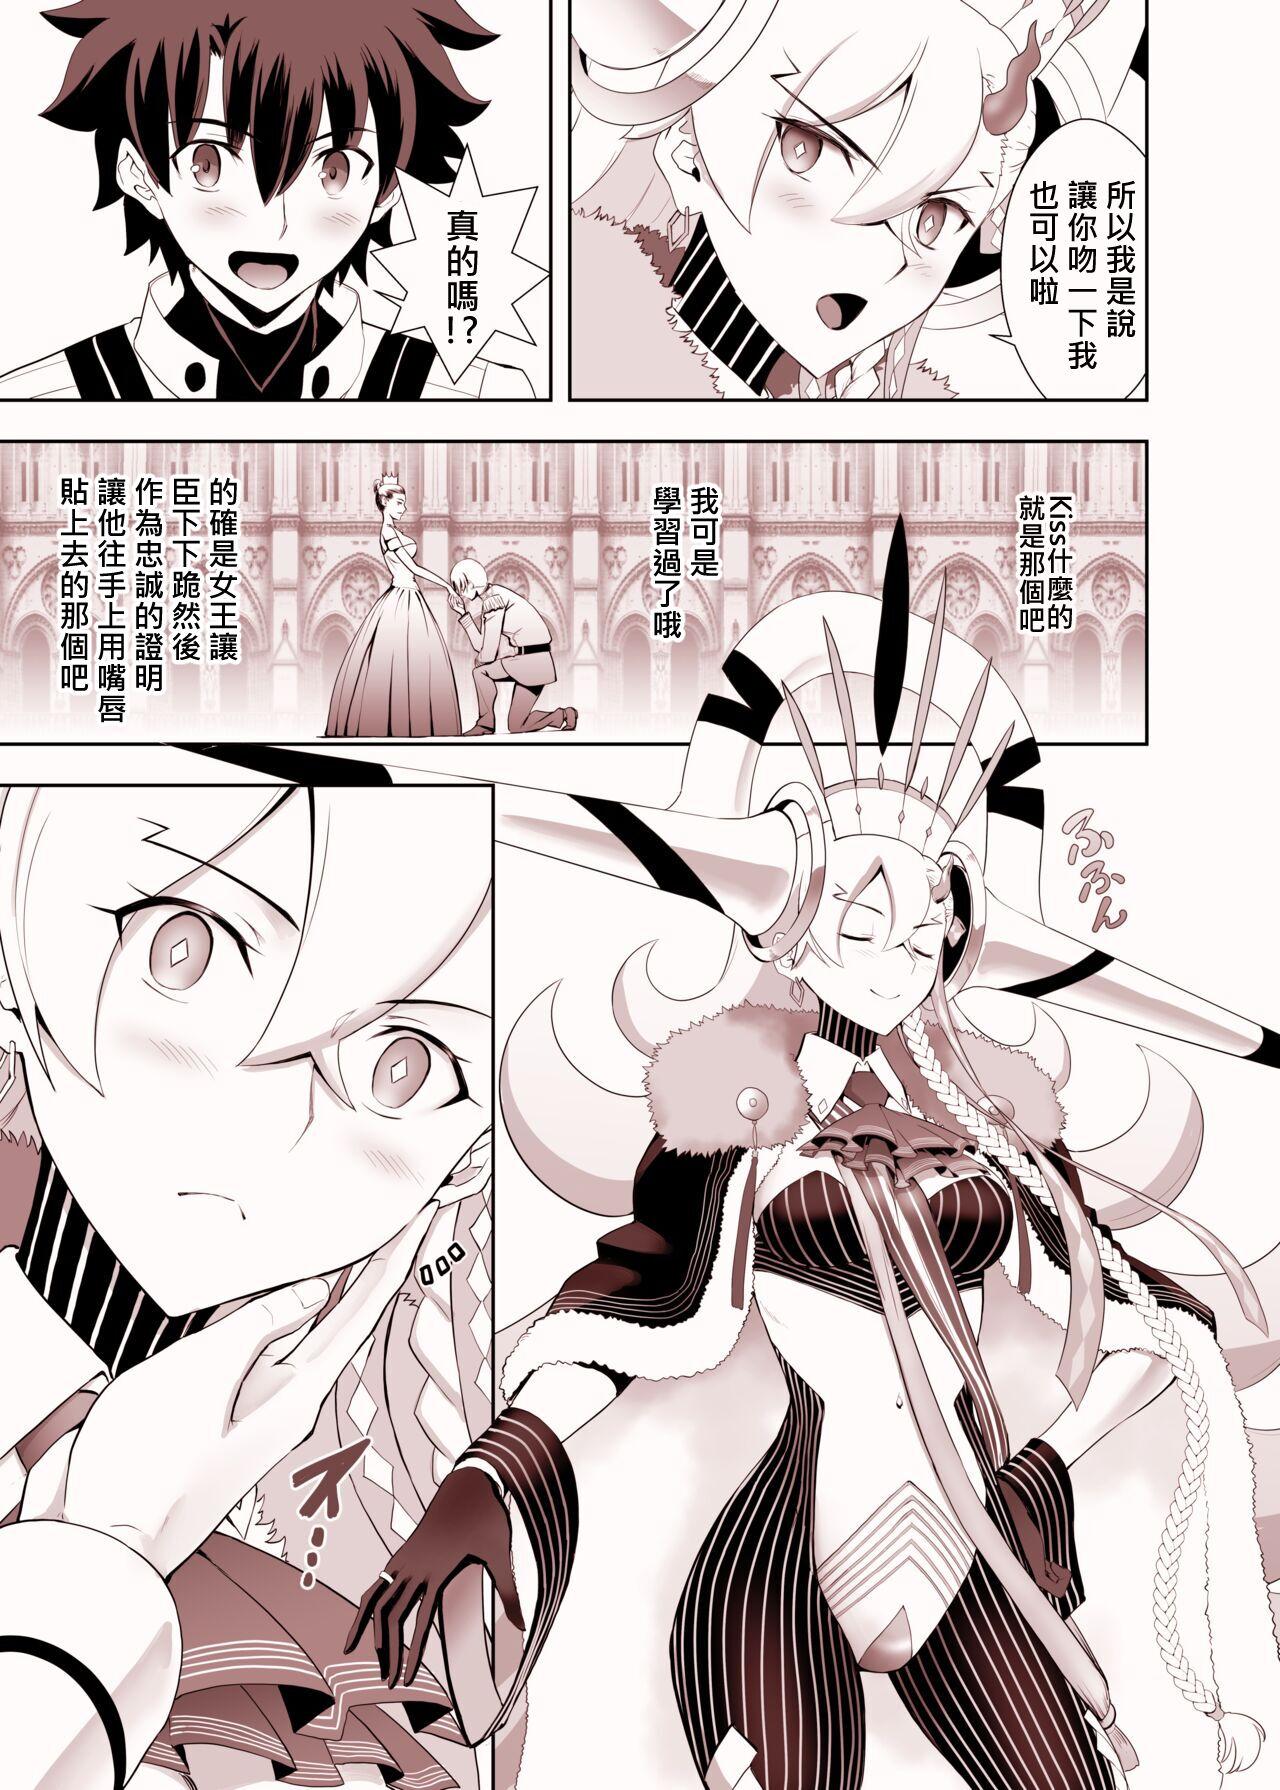 Anus Lovely U - Fate grand order 18 Porn - Page 4